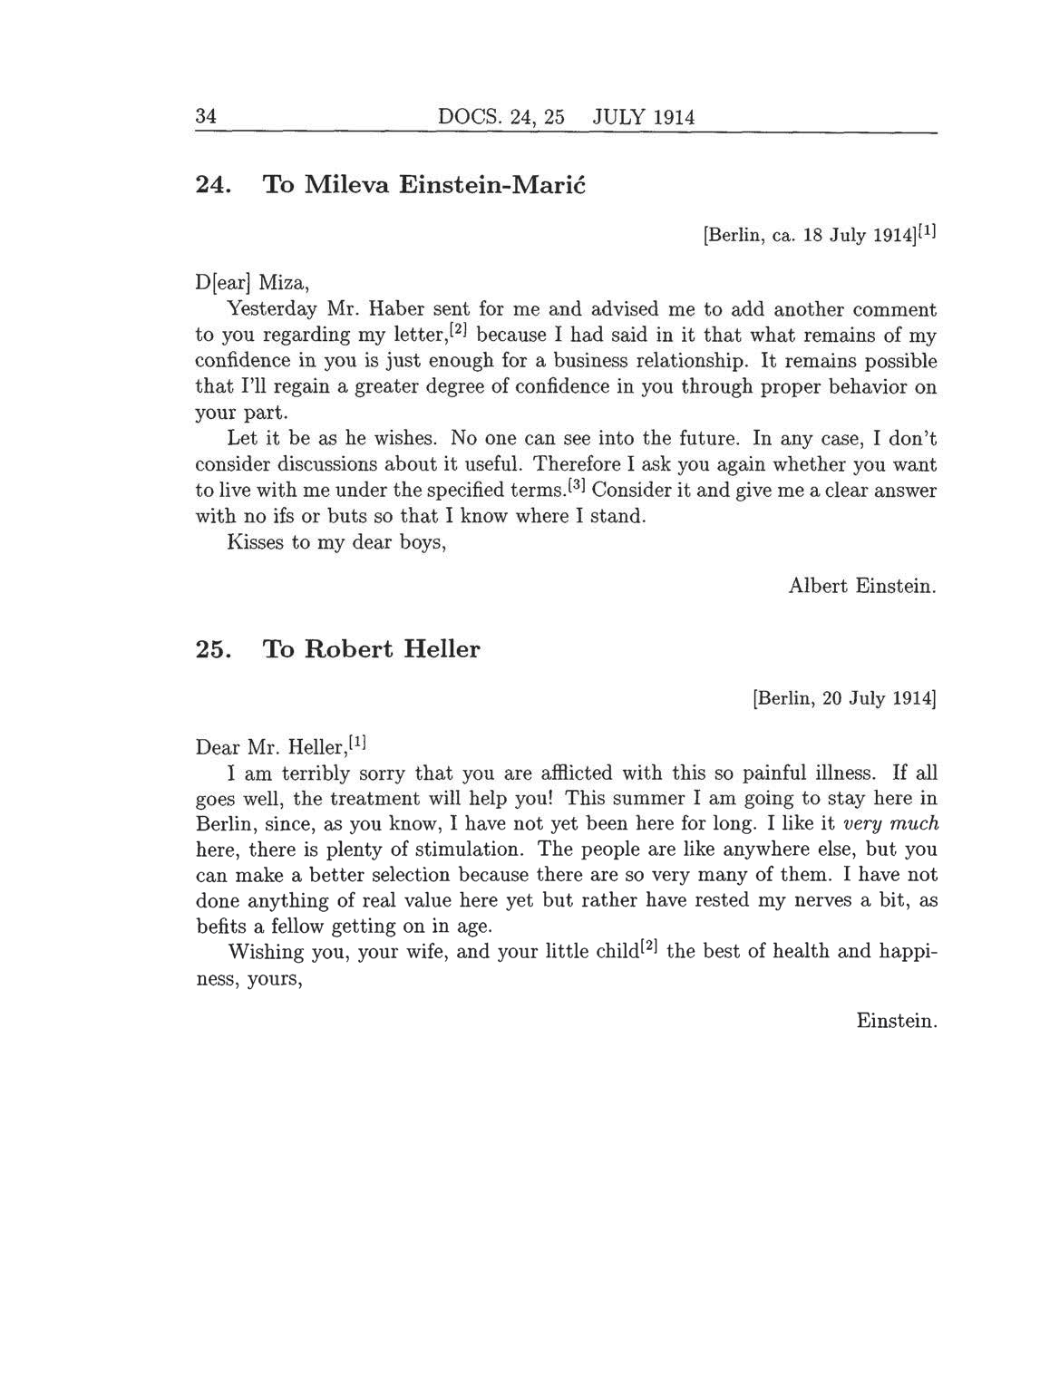 Volume 8: The Berlin Years: Correspondence, 1914-1918 (English translation supplement) page 34